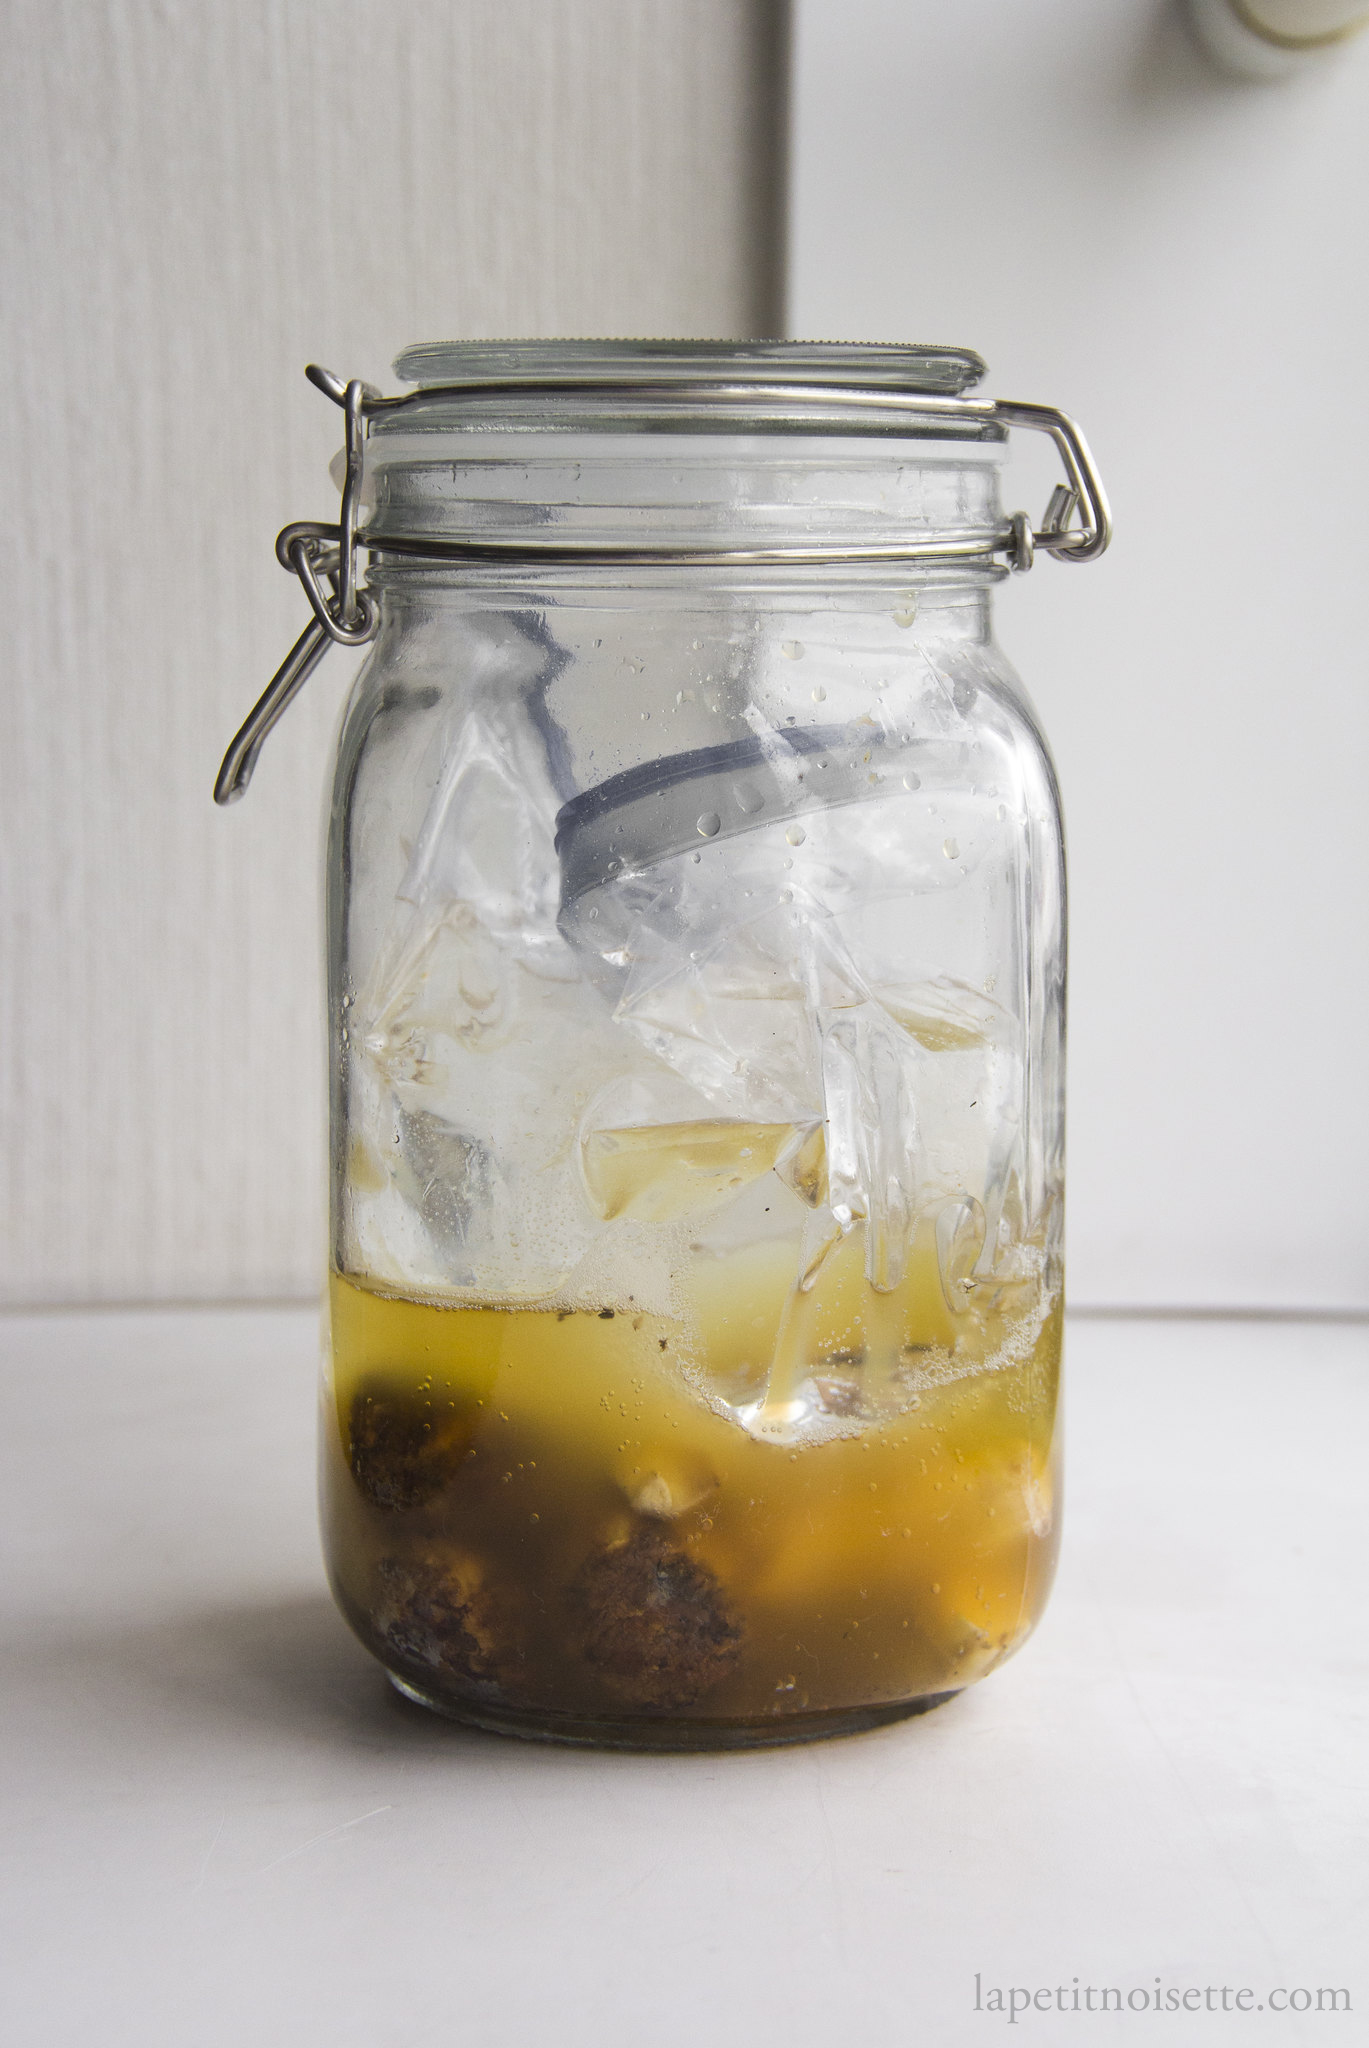 A glass jar showing the carbon dioxide released during lactic acid fermentation.